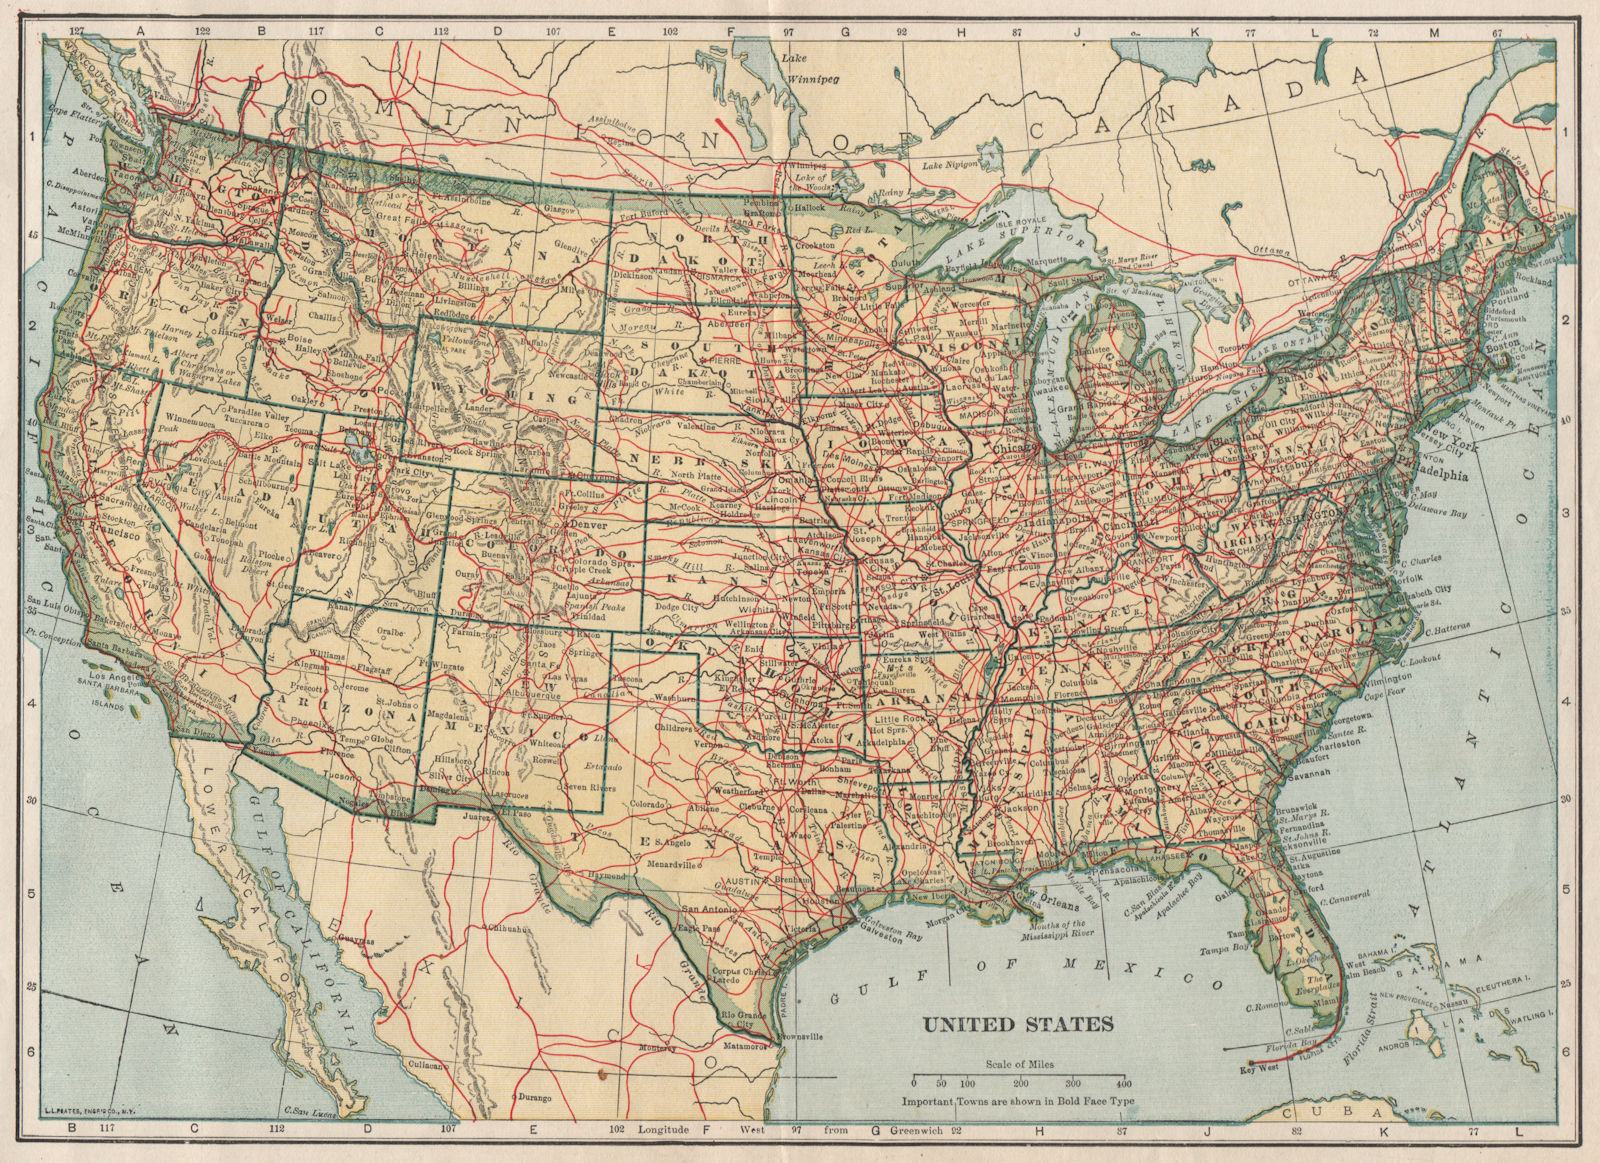 Associate Product USA. United States showing Highways . POATES 1925 old vintage map plan chart